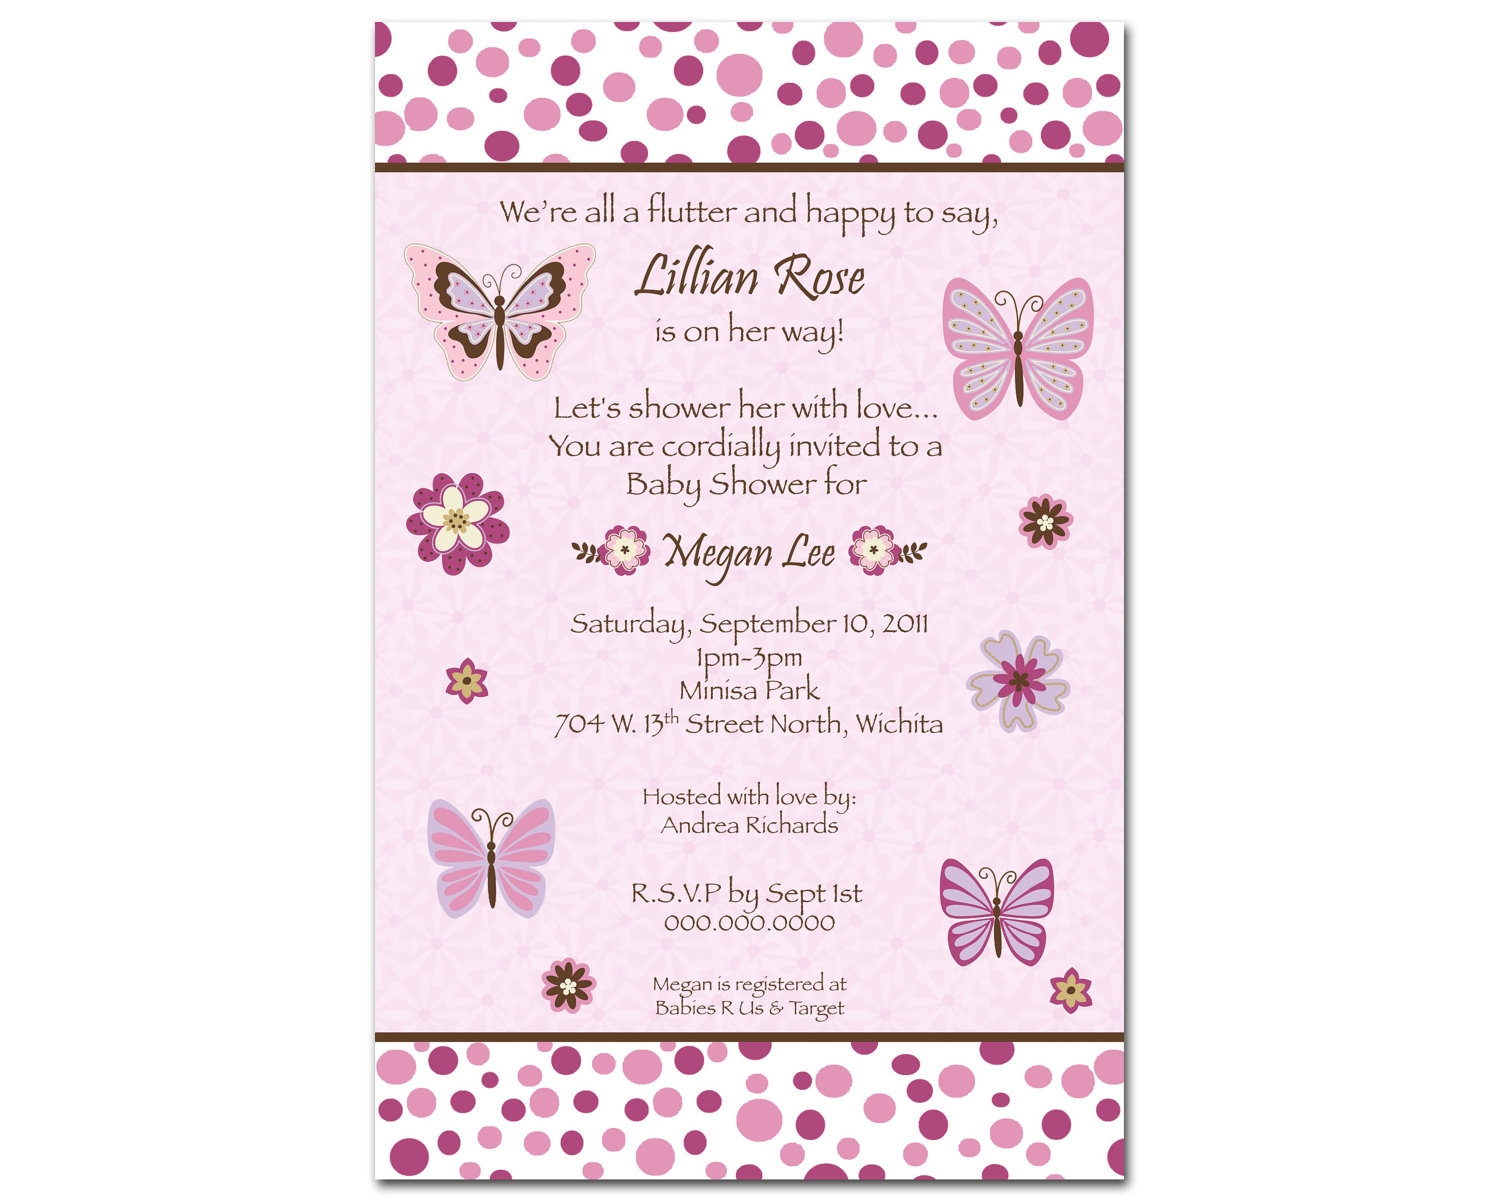 Full Size of Baby Shower:delightful Baby Shower Invitation Wording Picture Designs Baby Shower Invitation Wording Baby Shower Snapchat Filter Baby Shower Outfit Guest Para Baby Shower Baby Shower Halls Baby Shower Invitations Awesome Baby Shower Invitation Wording 43 Wyllieforgovernor For